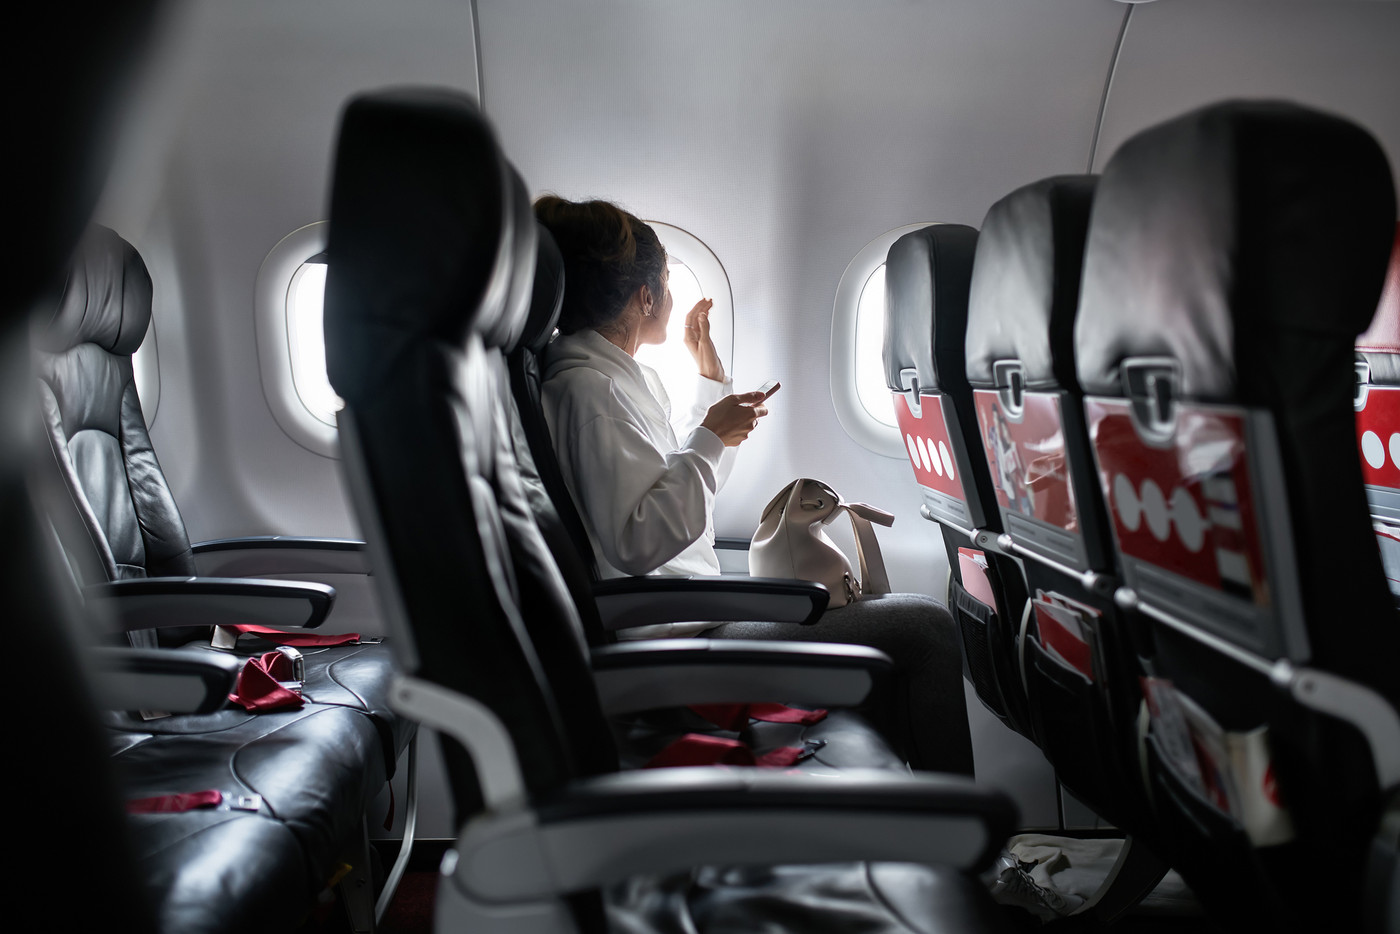 Woman with smartphone sits on black seat in plane